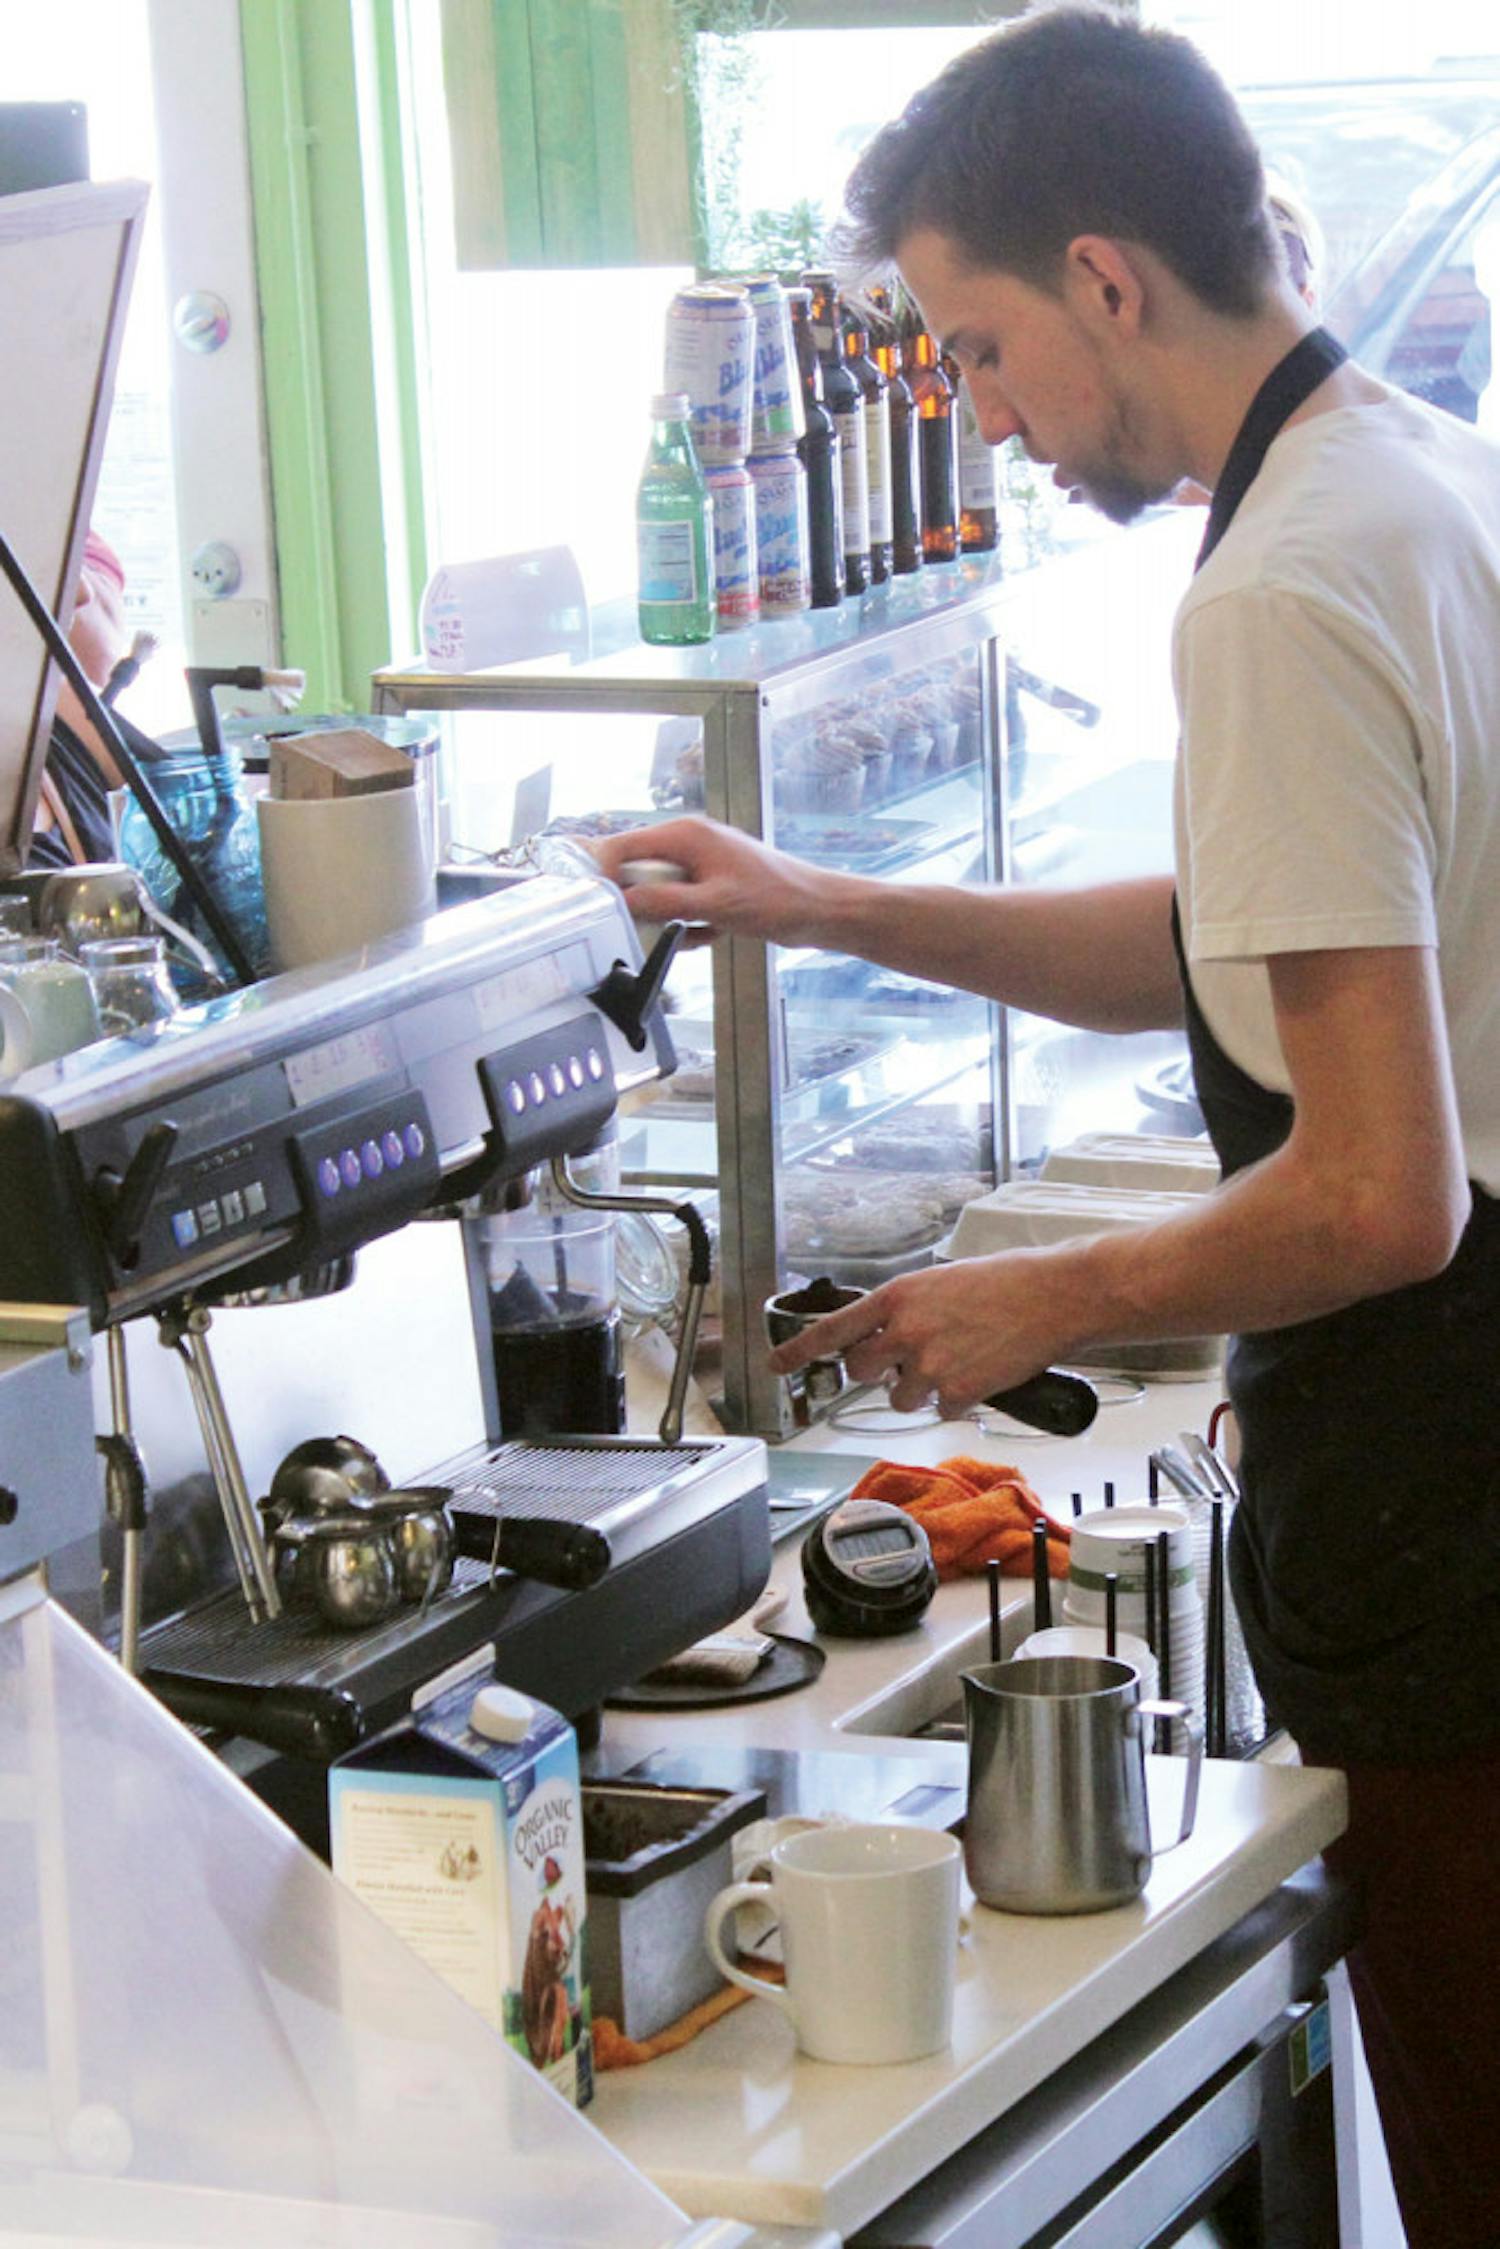 Nick Bowden, 20, operates the new espresso machine at Karma Cream on Aug. 25, 2015. “It was time to get a replacement, and this one is so much better,” Bowden said.